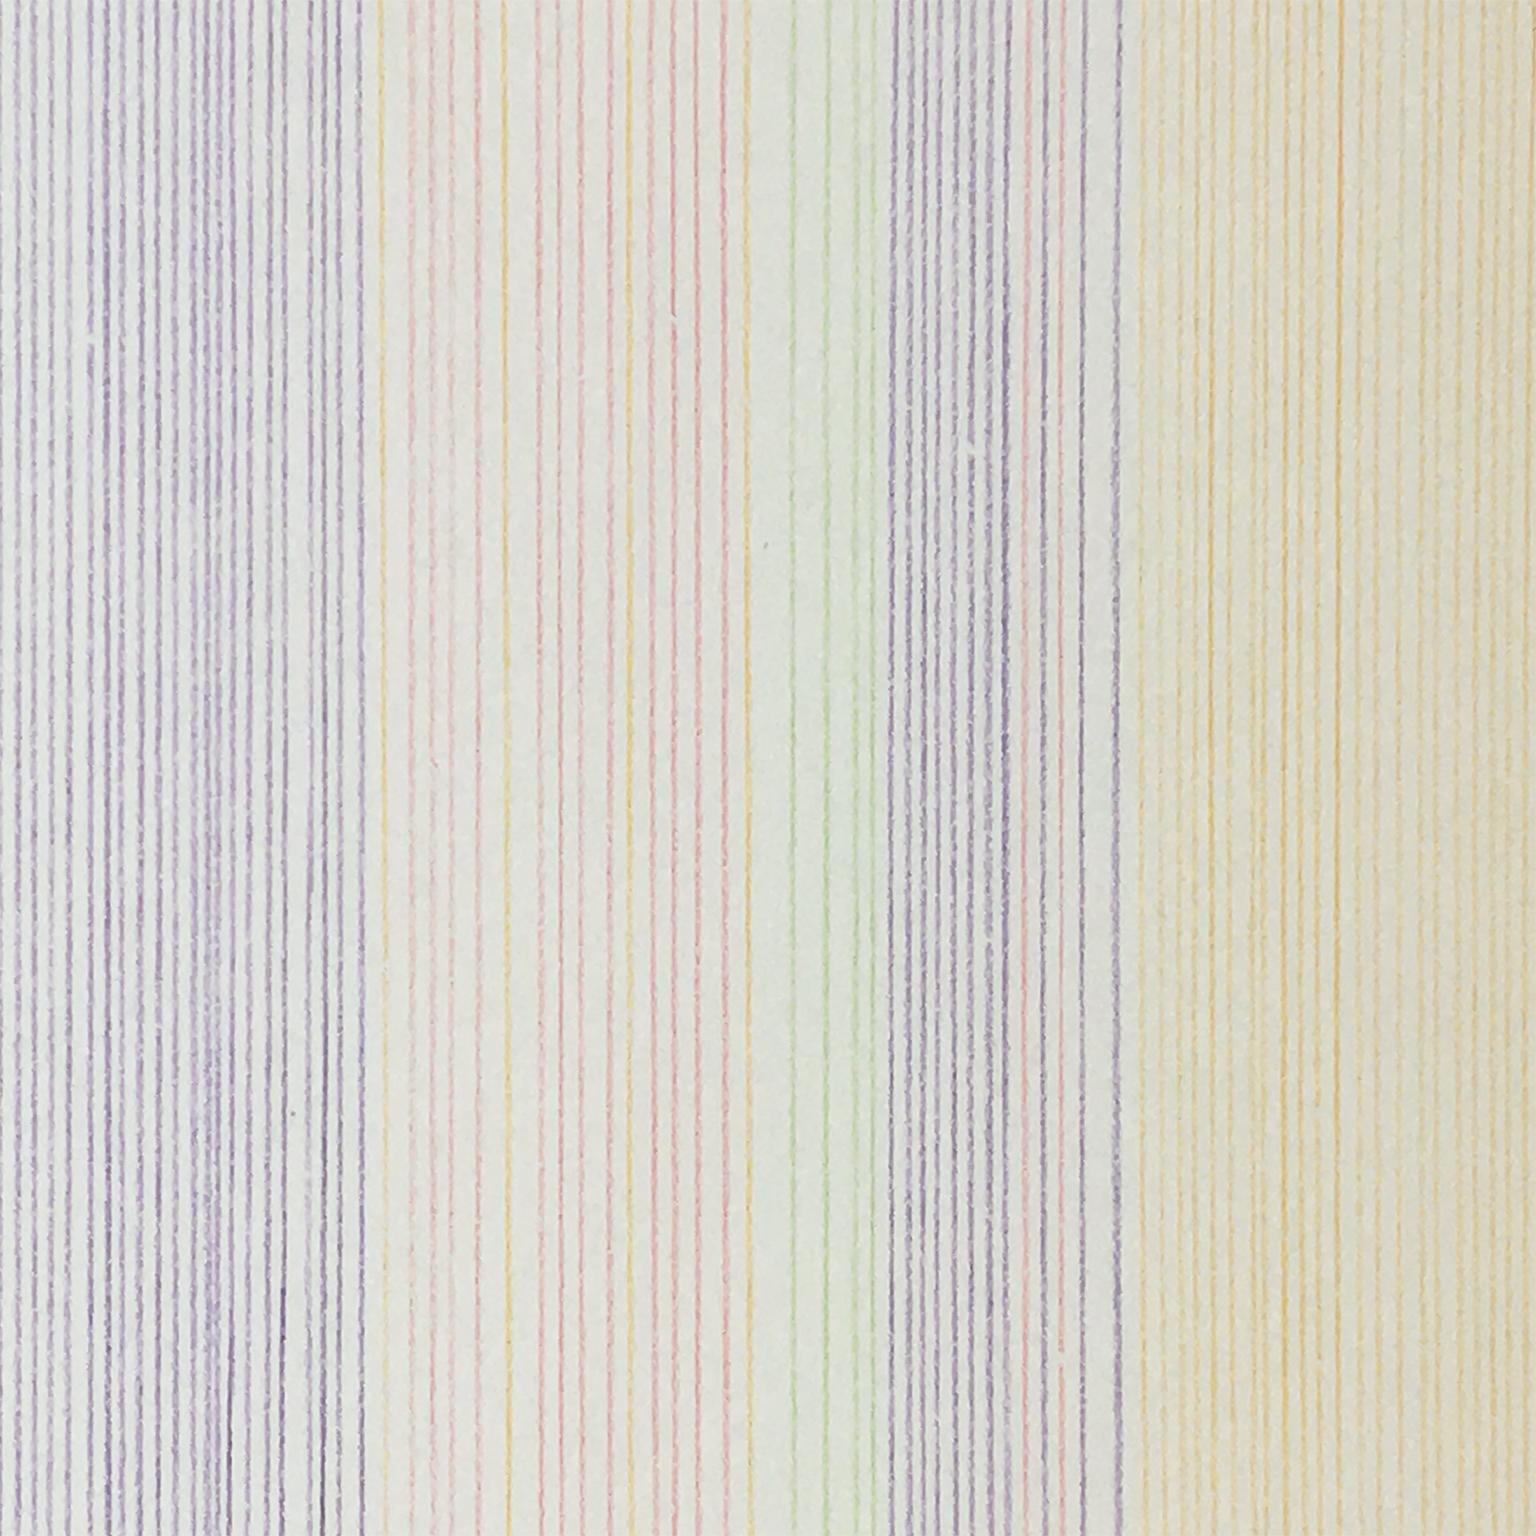 Rainbow shades shine in this abstract, color field print. Vibrant red, yellow, orange, purple, and green lines take on the organic quality of handmade paper, resulting in this subtle iteration of Gene Davis’ iconic color field stripe paintings. The